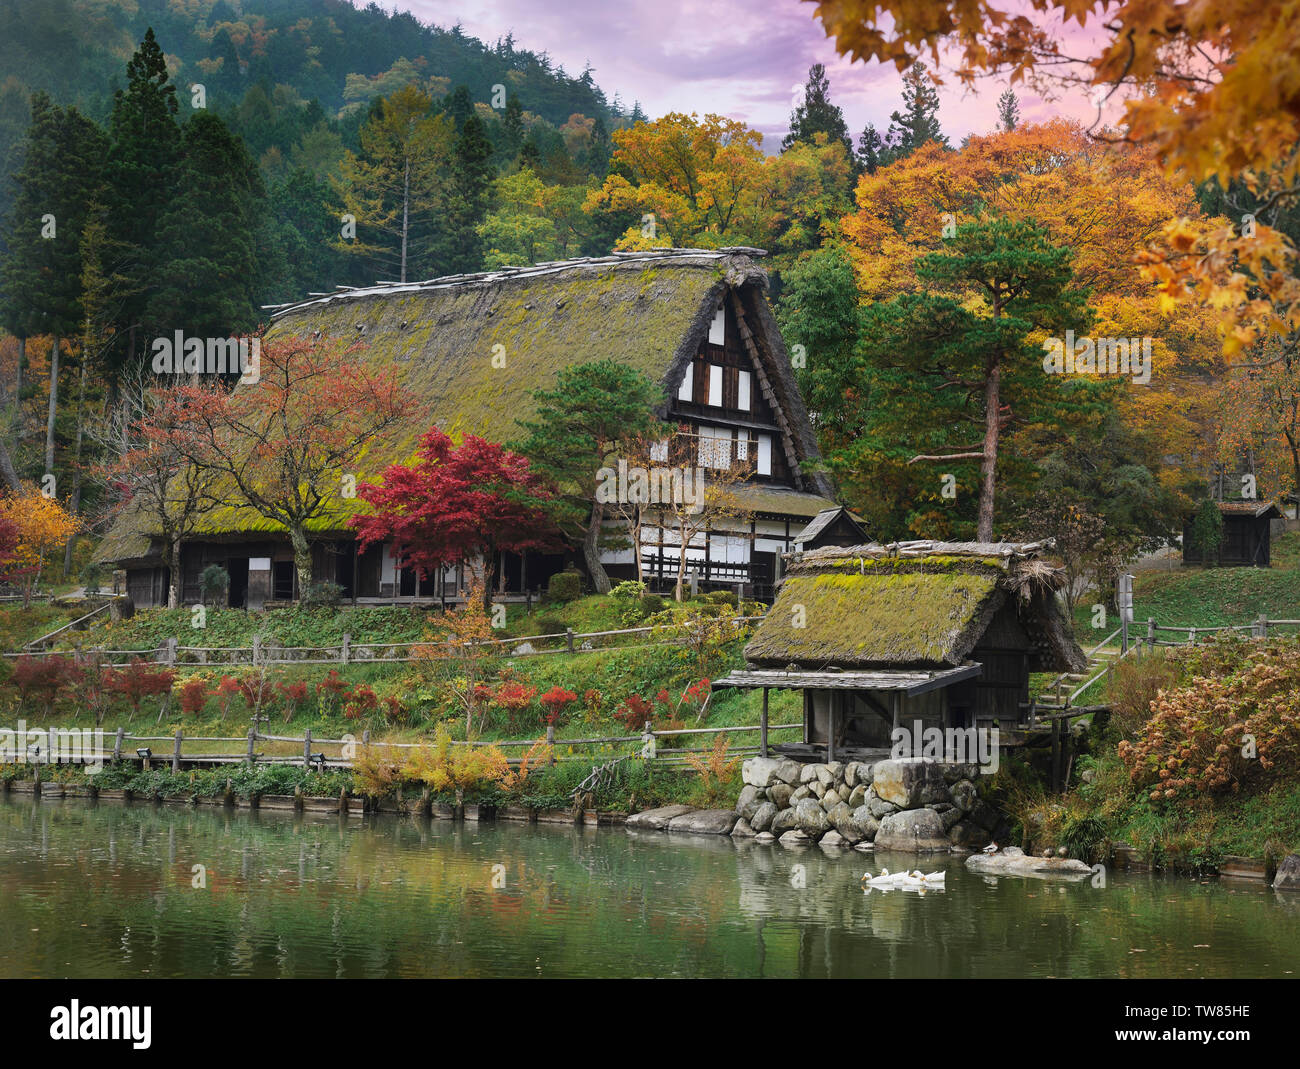 Traditional Japanese Gasshou style farm house with thatched roof and a water mill on a pond at Hida Folk Village, Hida Minzoku Mura, Takayama, Japan Stock Photo